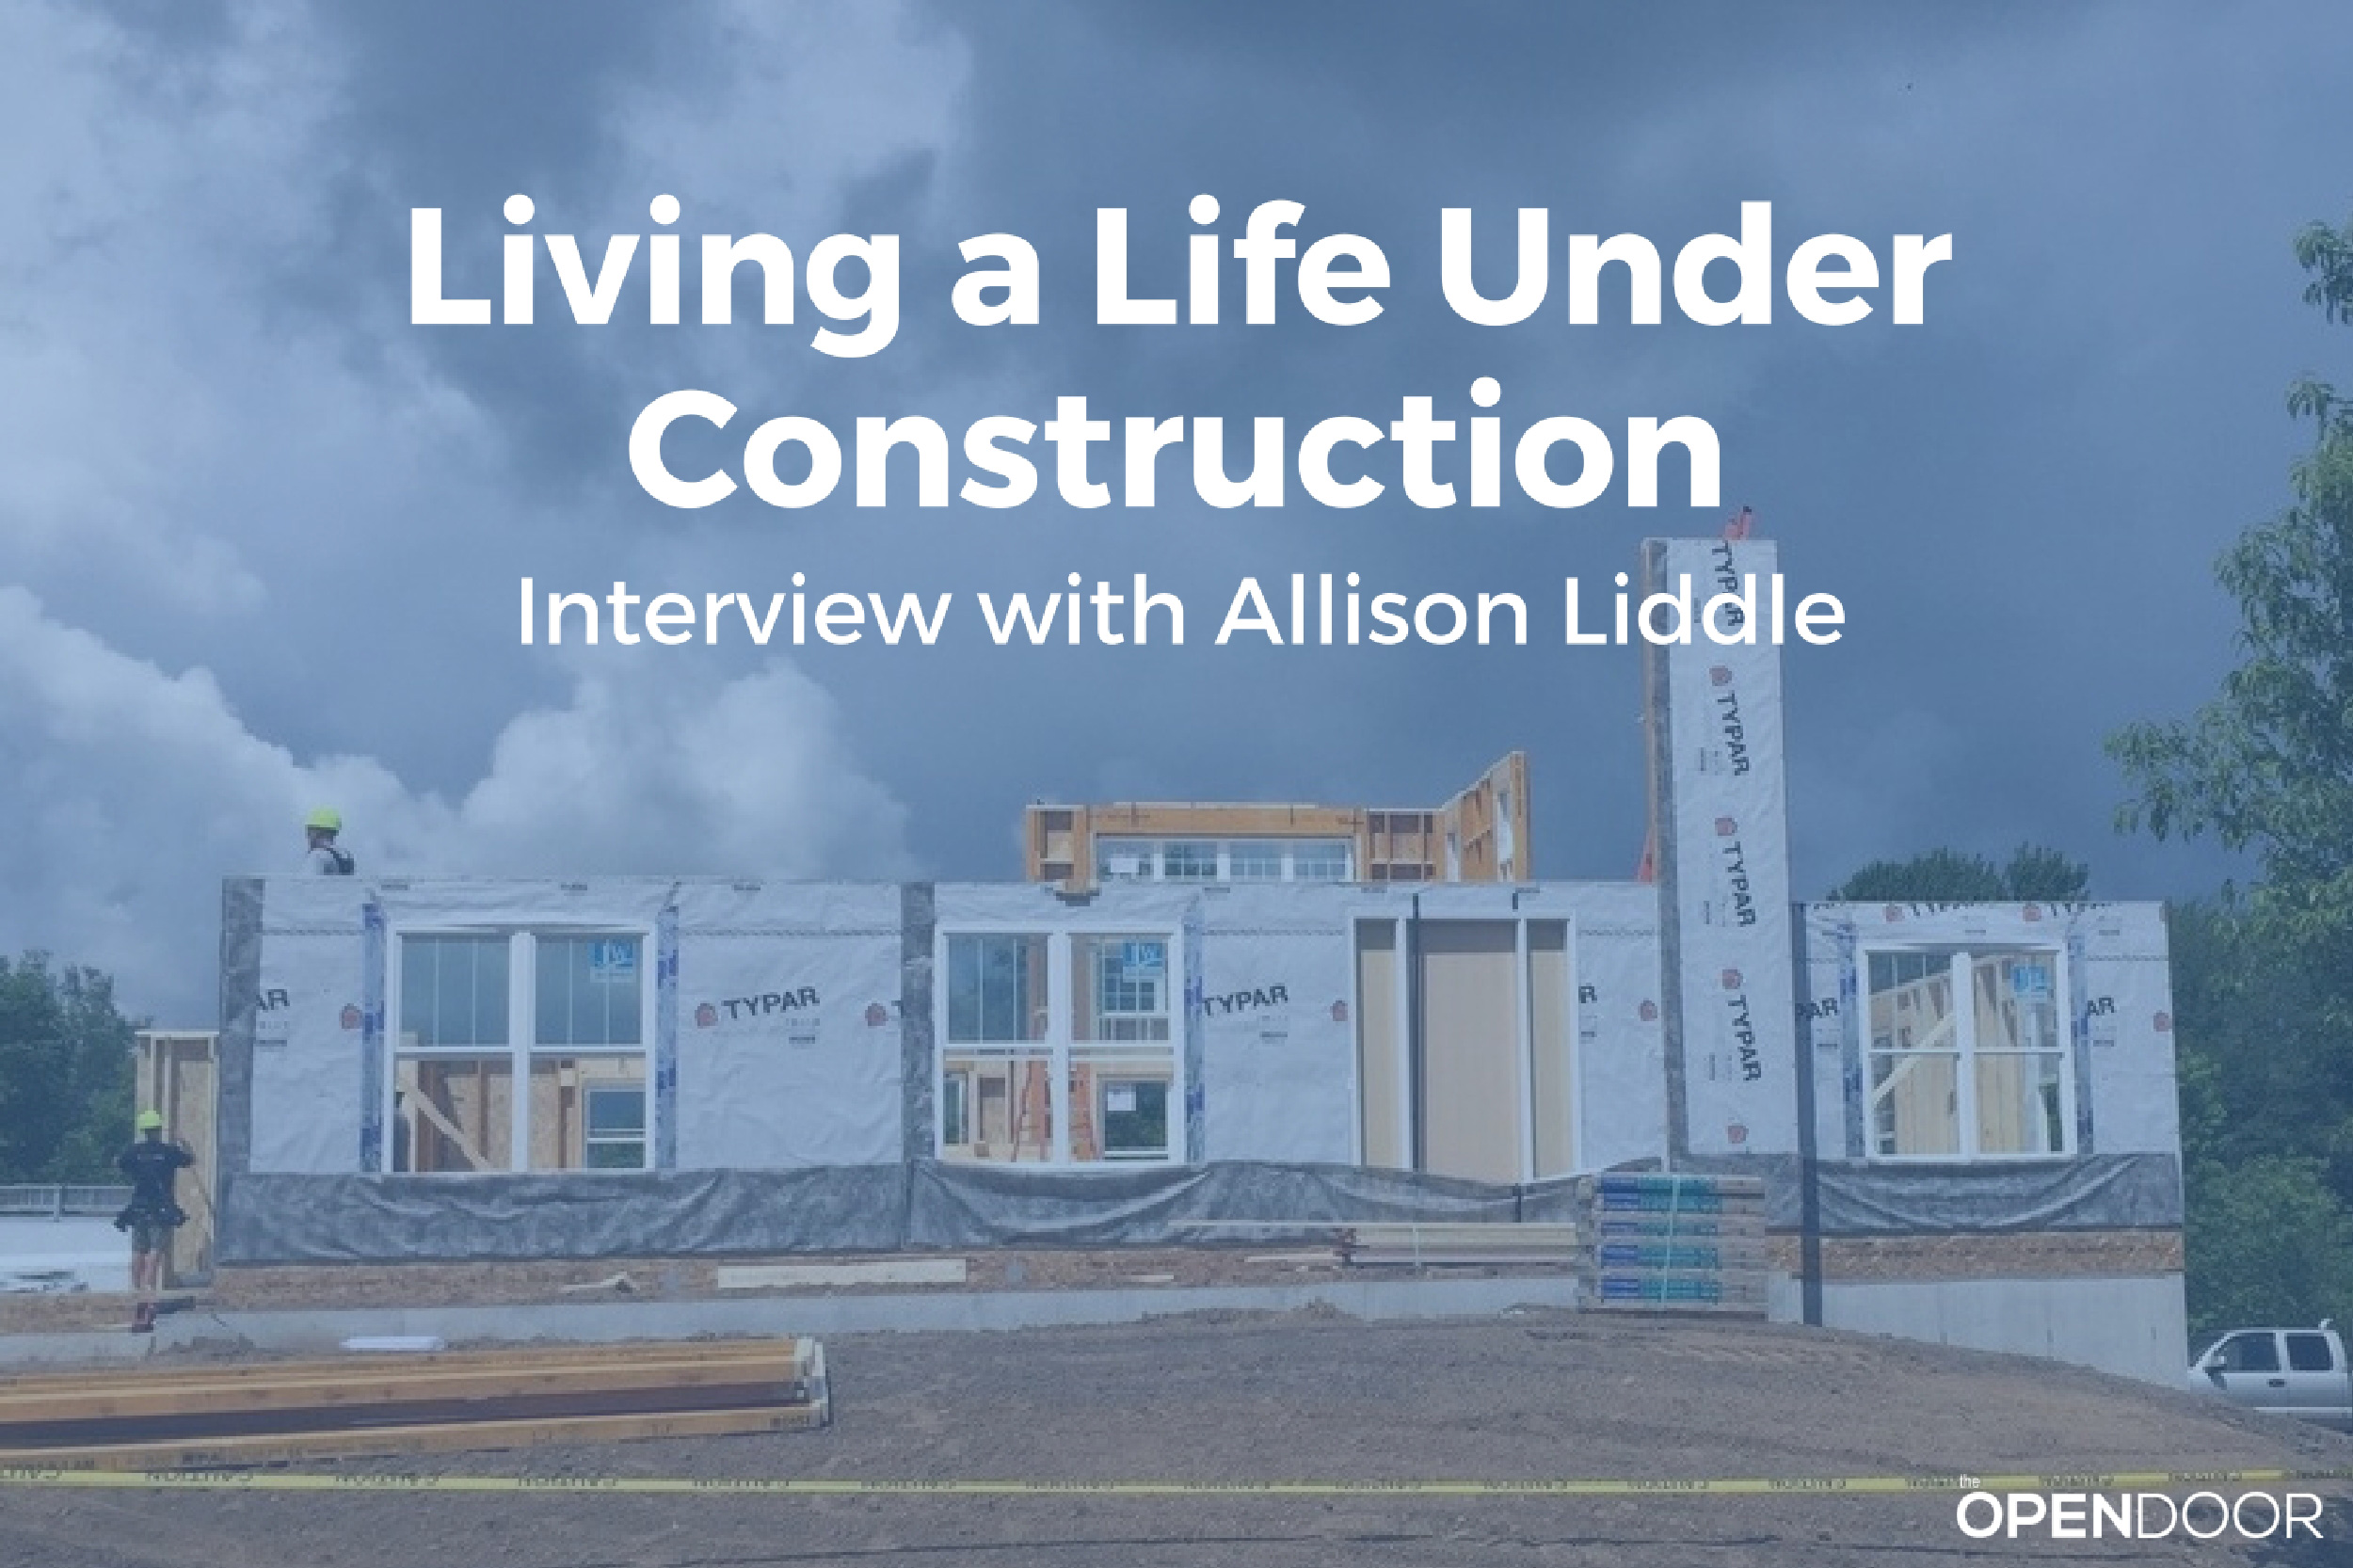 Living a Life Under Construction - Interview with Allison Liddle